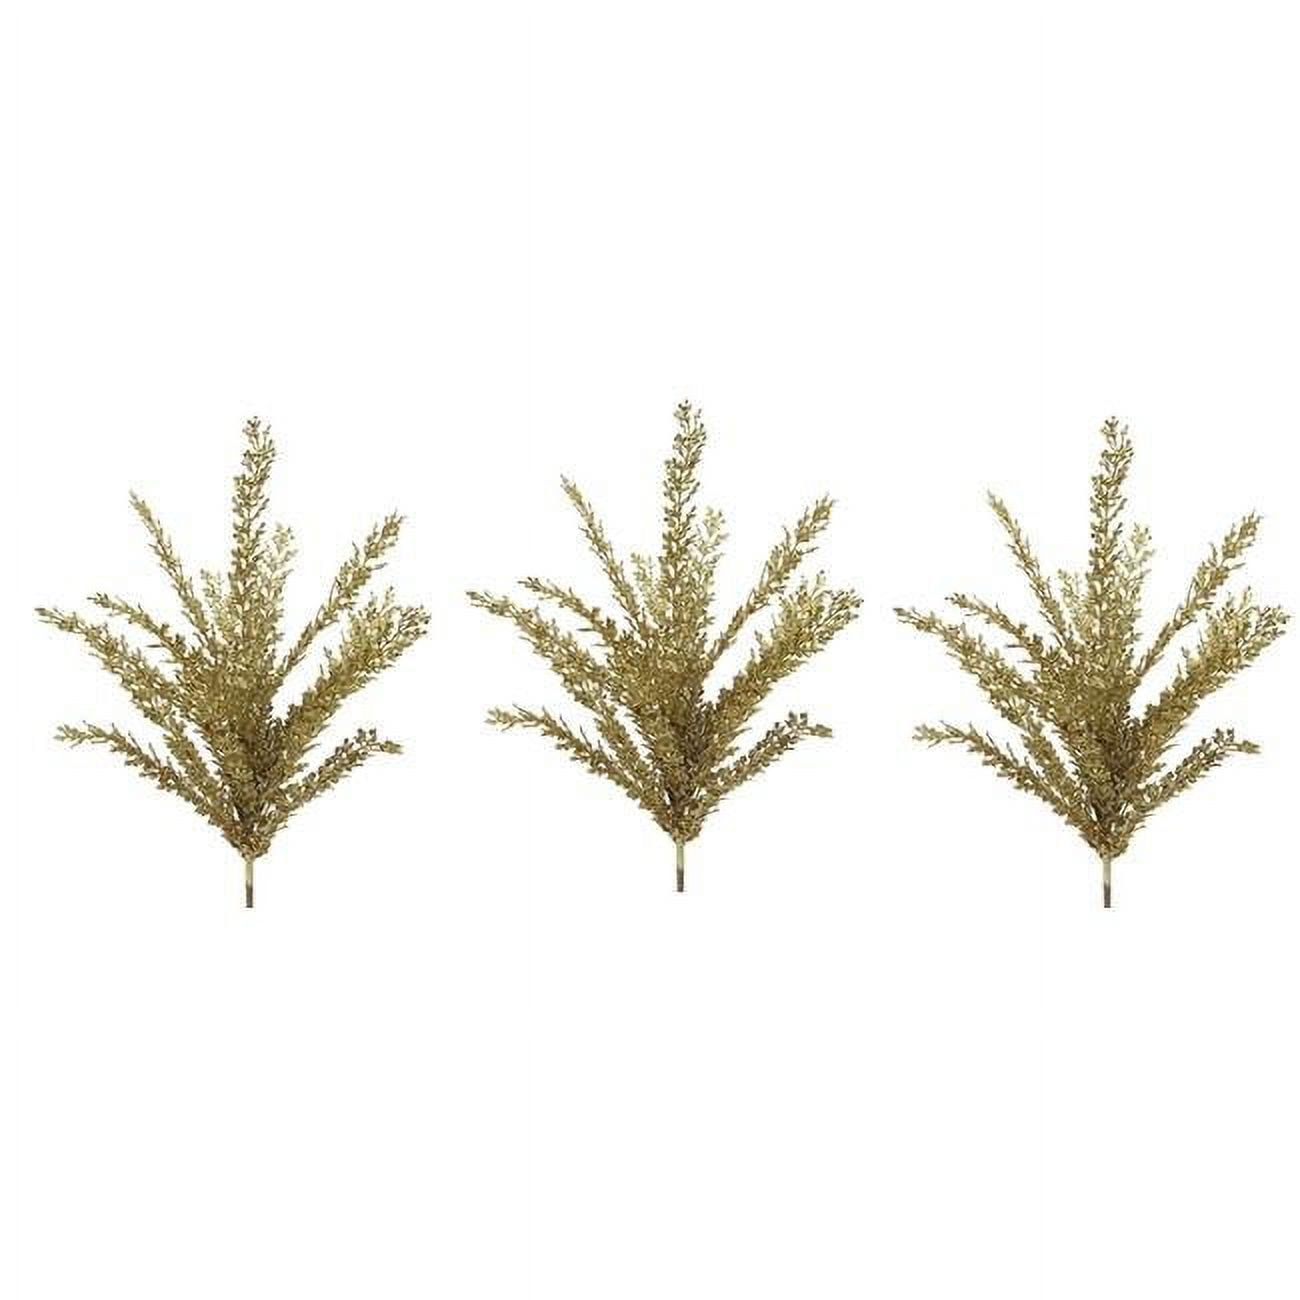 Admired By Nature Gxl7706-gold-3 23 In. Glitter Filigree Leaf Spray Christmas Decor, Gold - Set Of 3